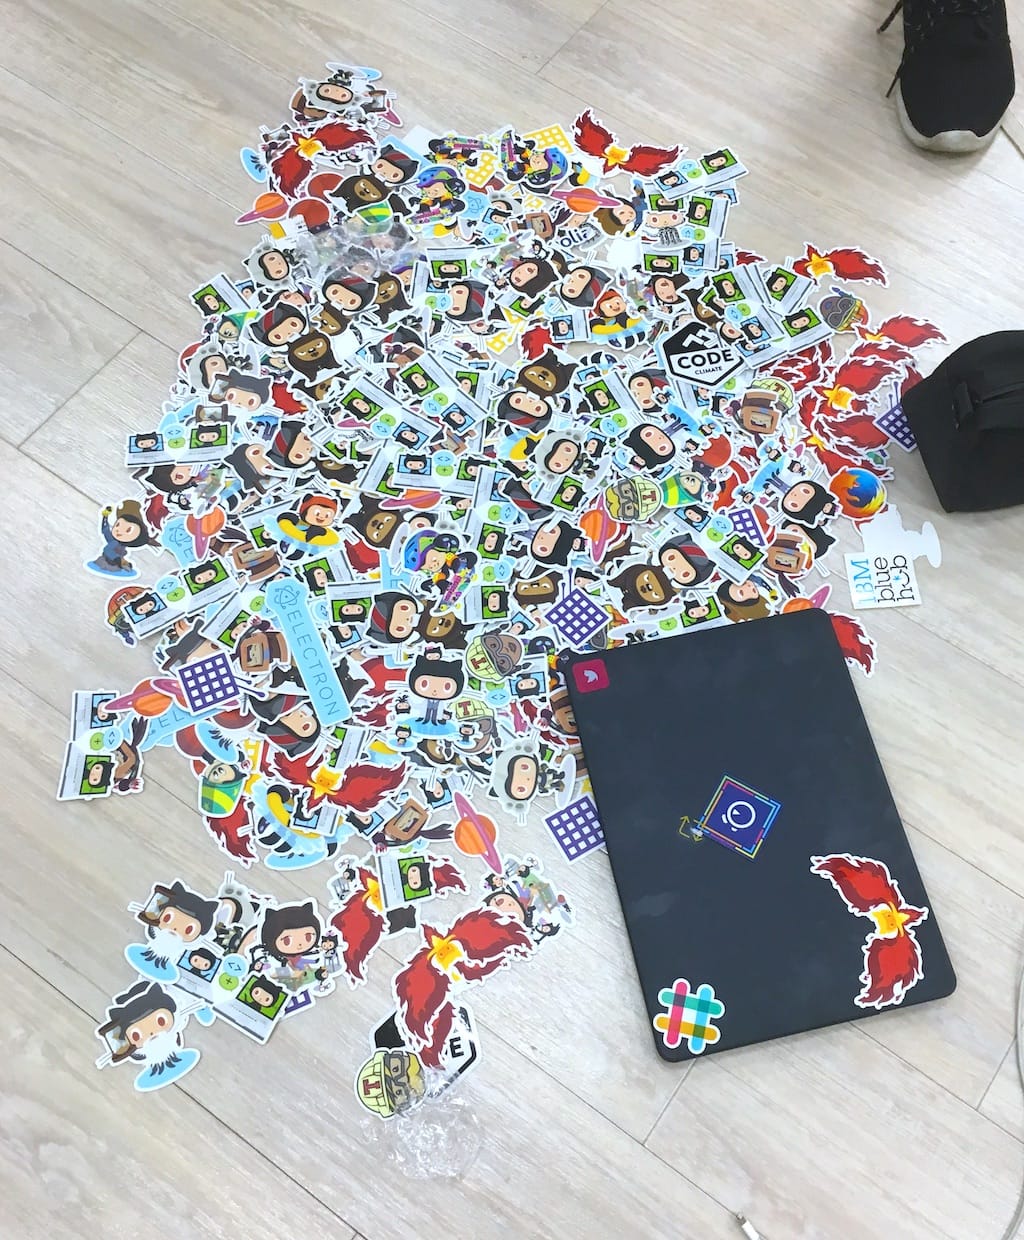 Github (and others) stickers on the floor, at DevRelCon Tokyo 2017